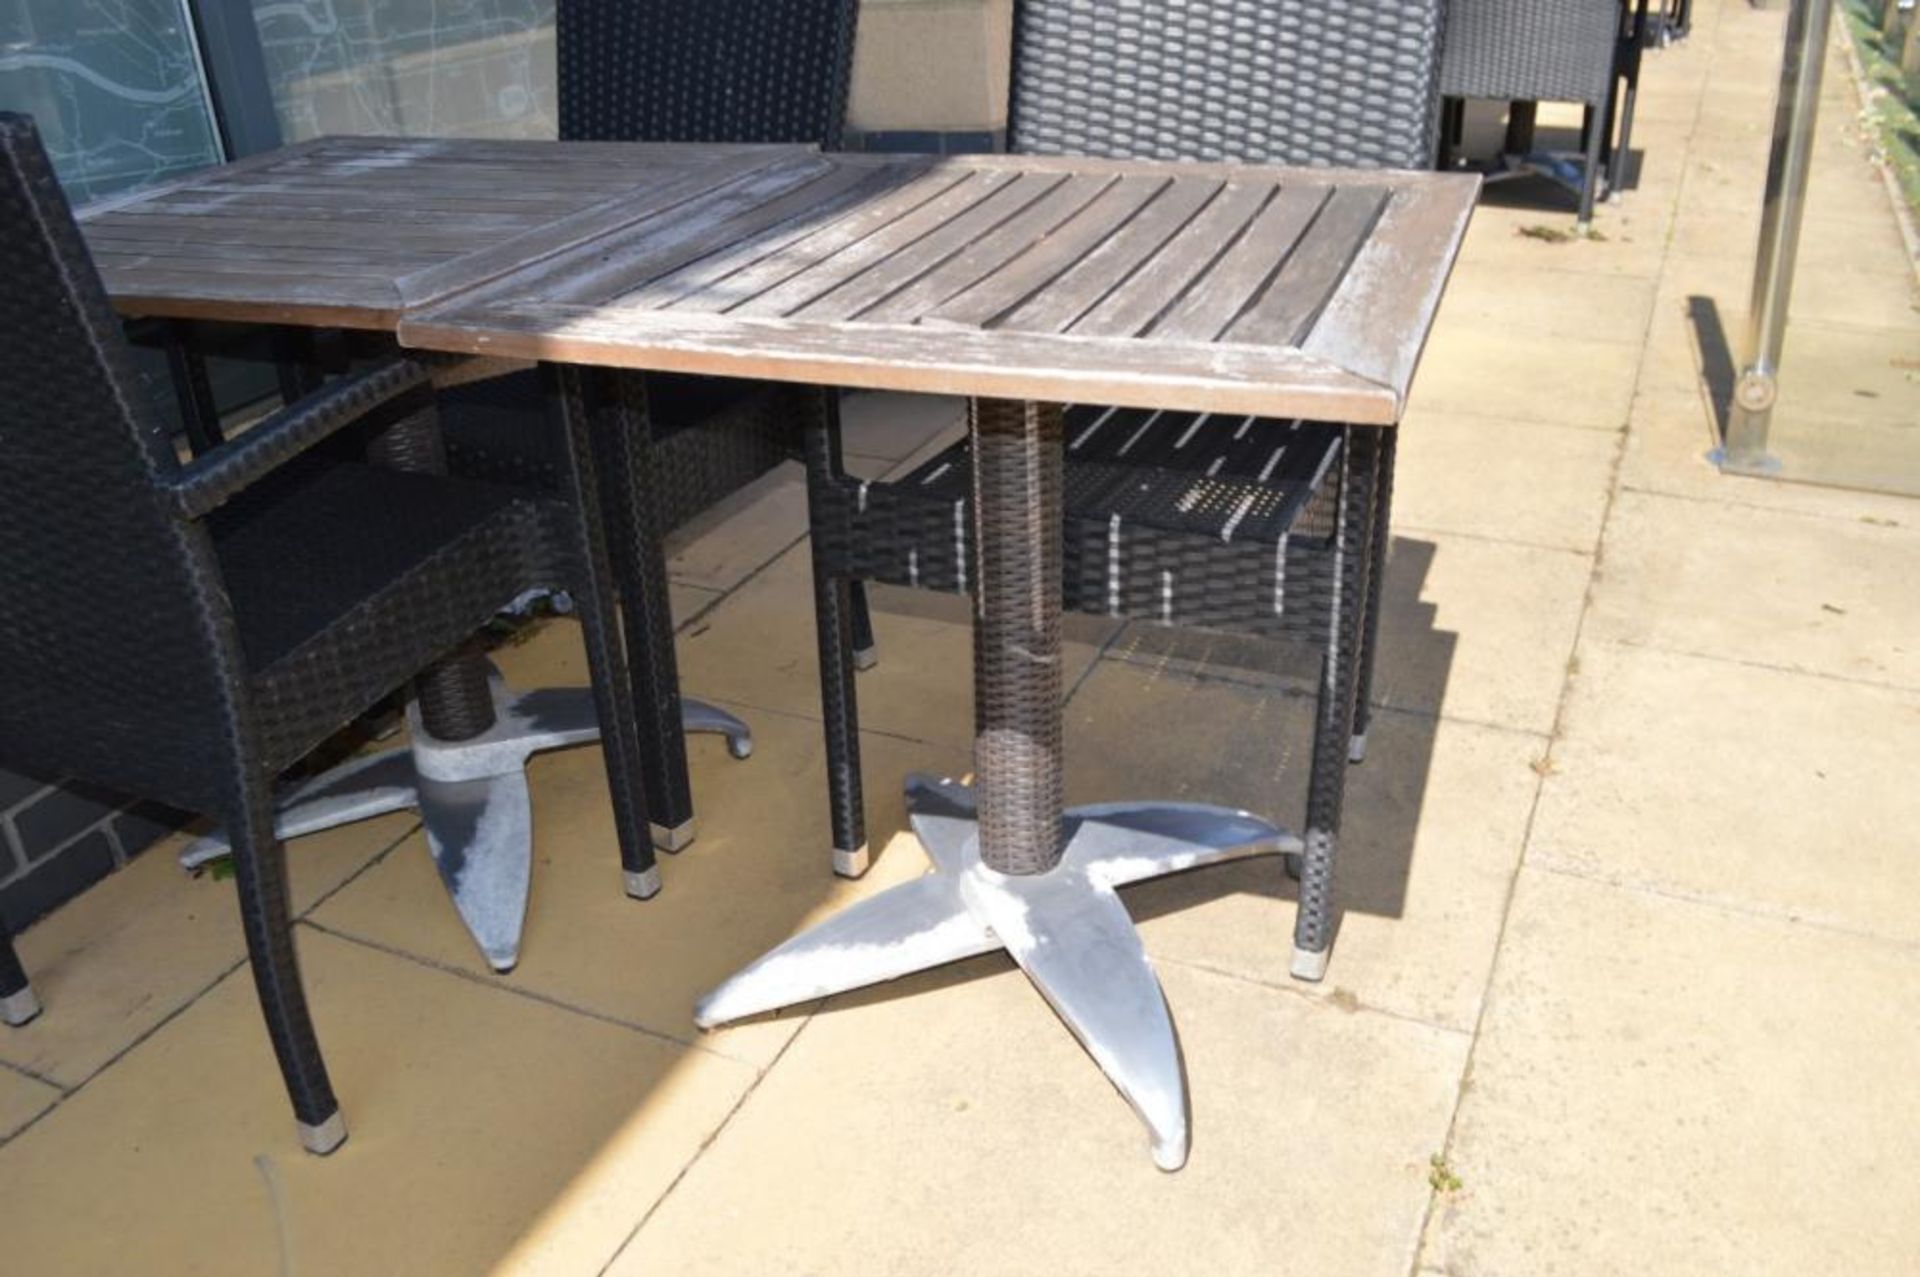 4 x Bistro Restaurant Garden Tables With Folding Wooden Top and Metal Bases - H72 x W70 x D70 - Image 3 of 4